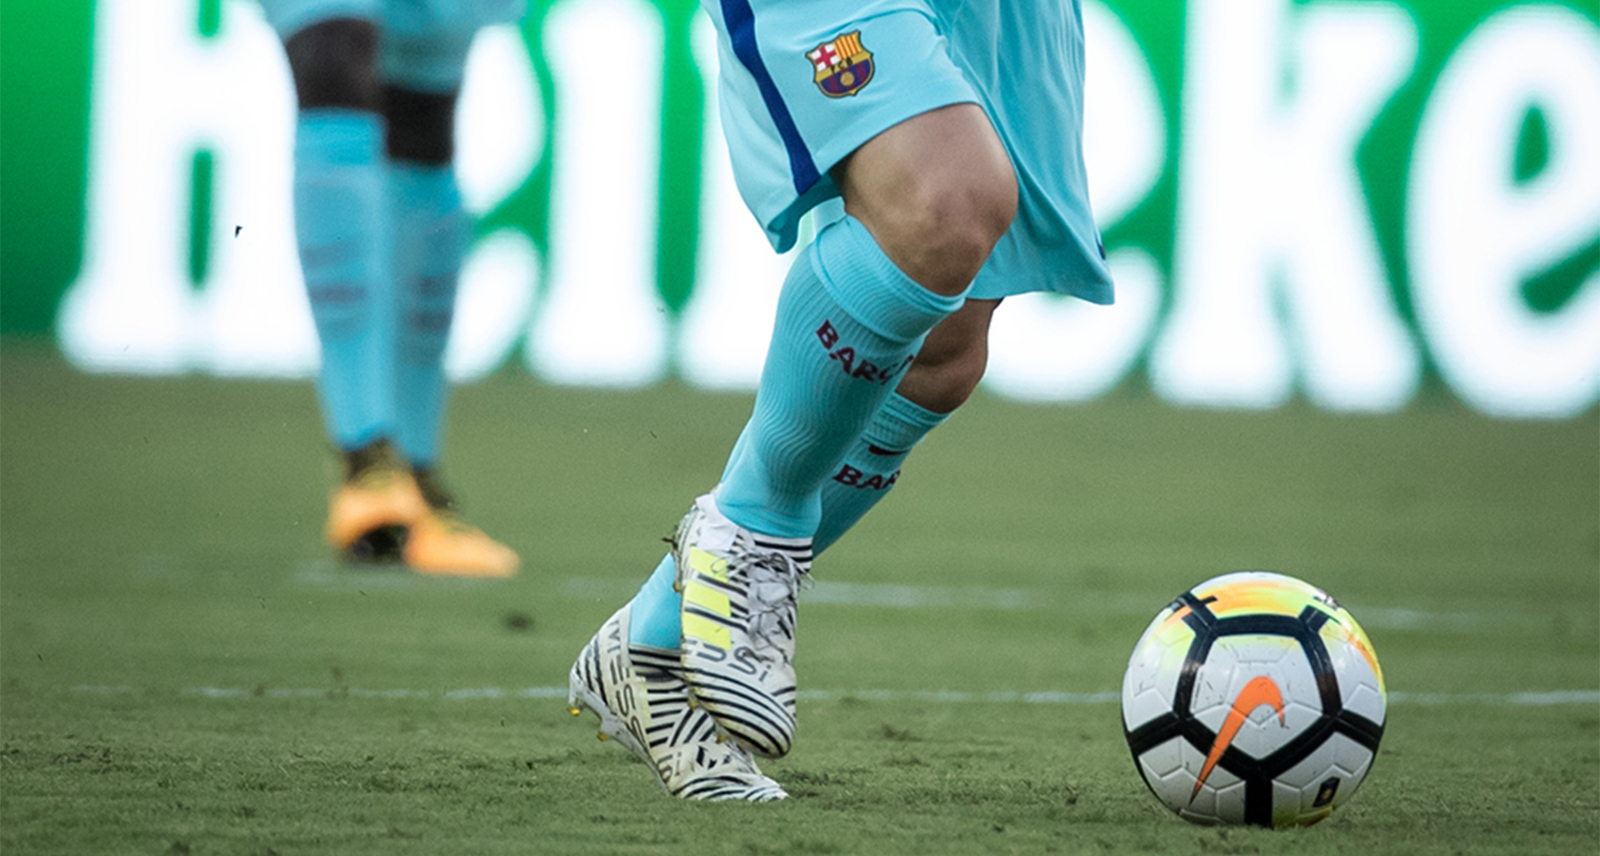 Messi crop of soccer ball and field